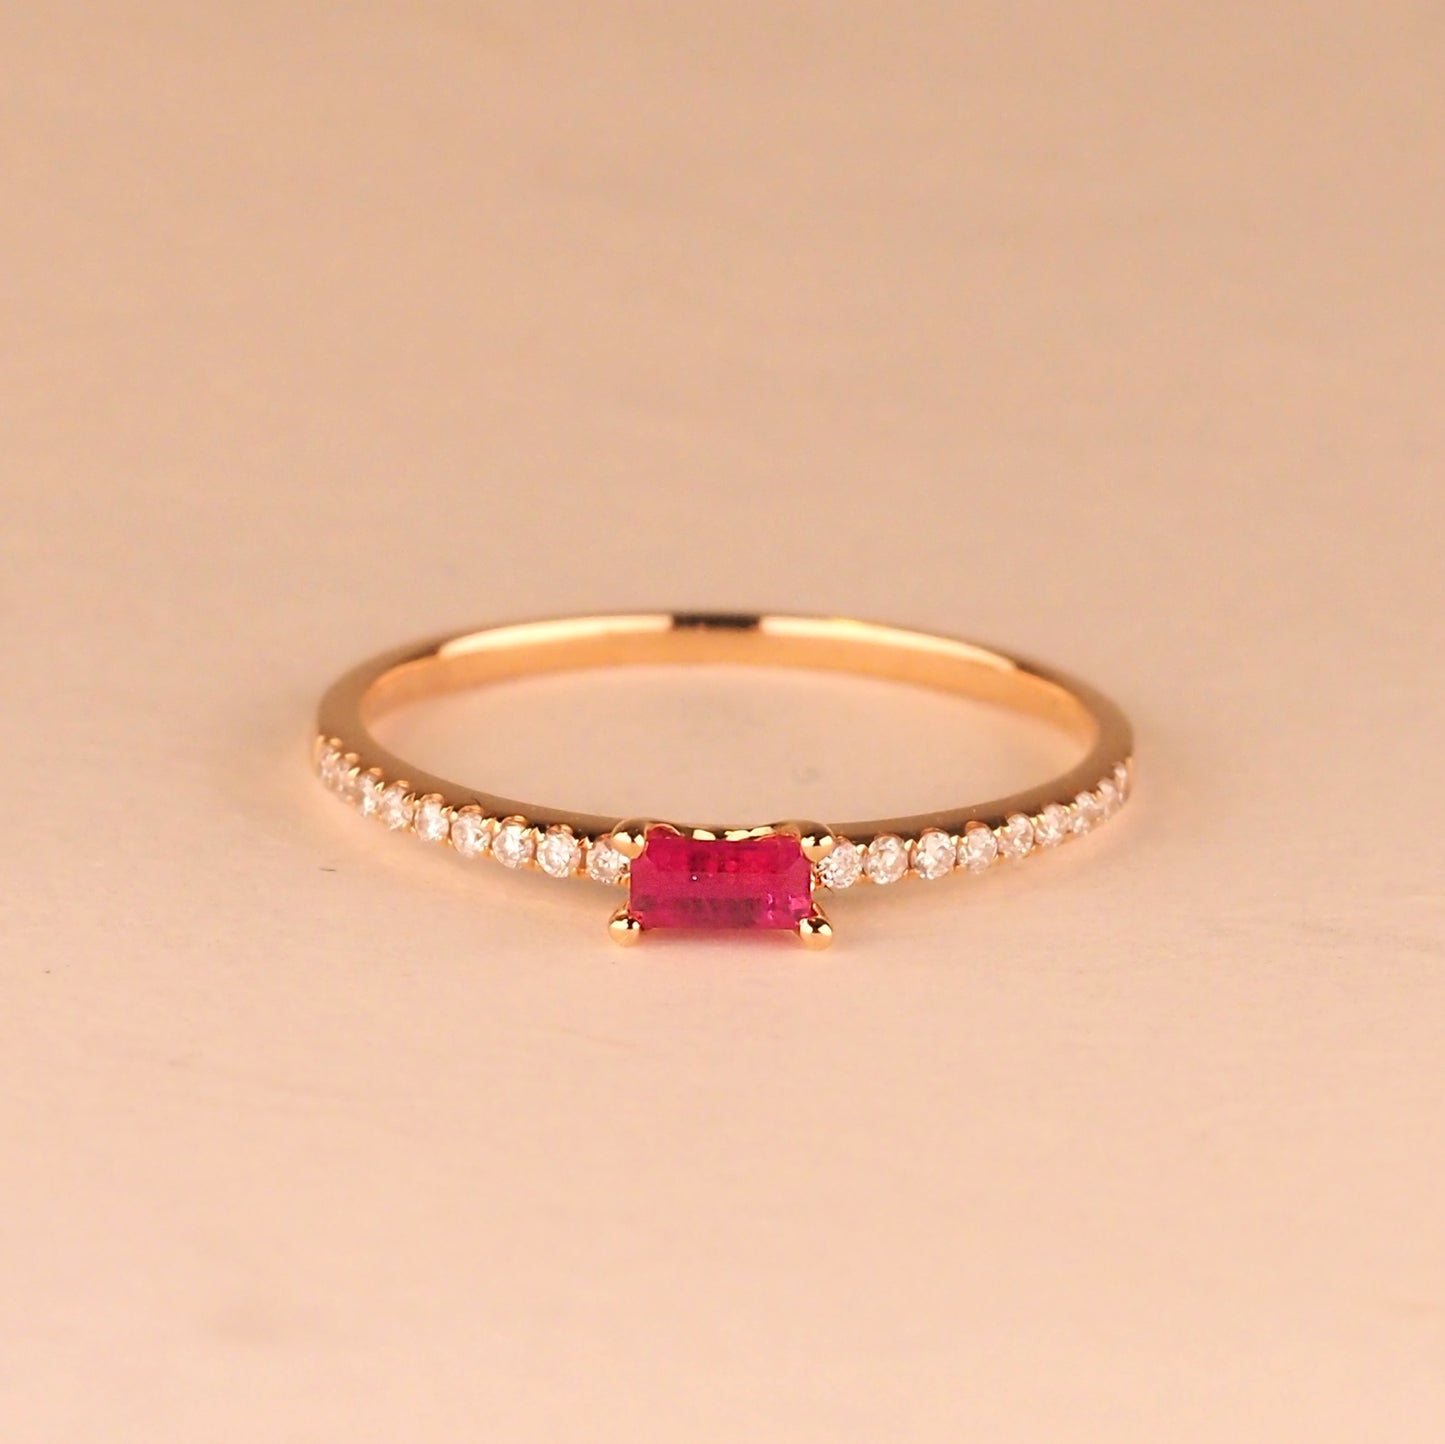 Ruby Baguette Diamond Band Ring